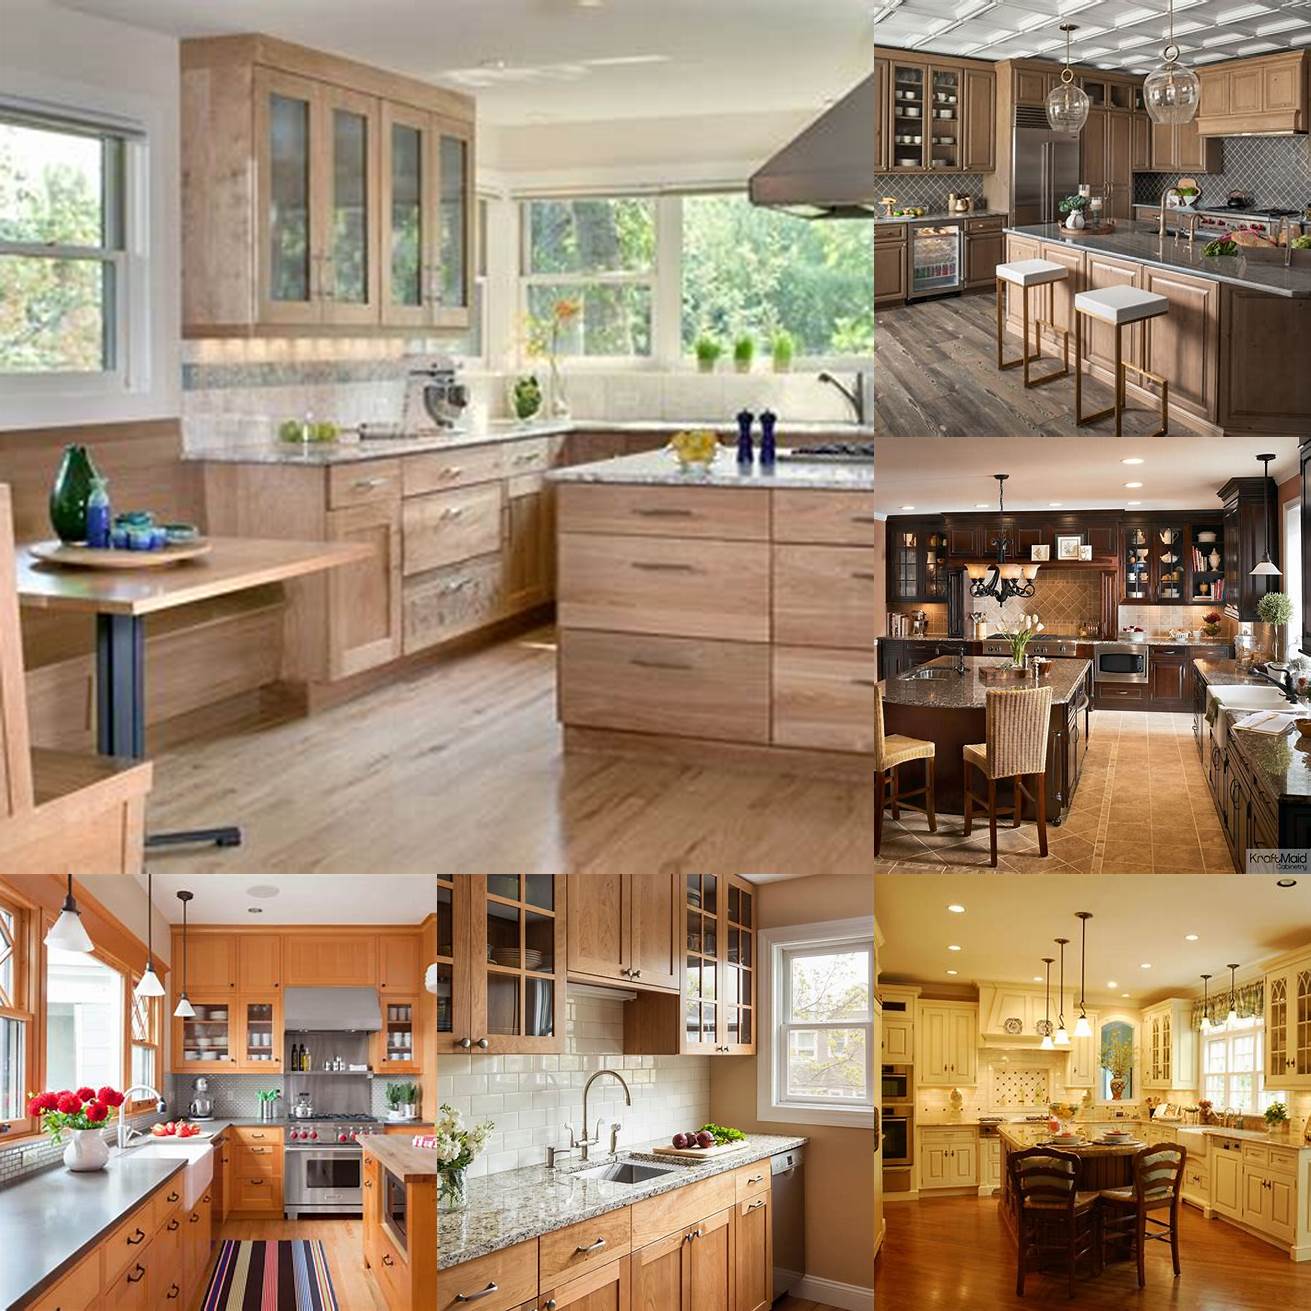 Wood cabinets give your kitchen a warm and traditional feel